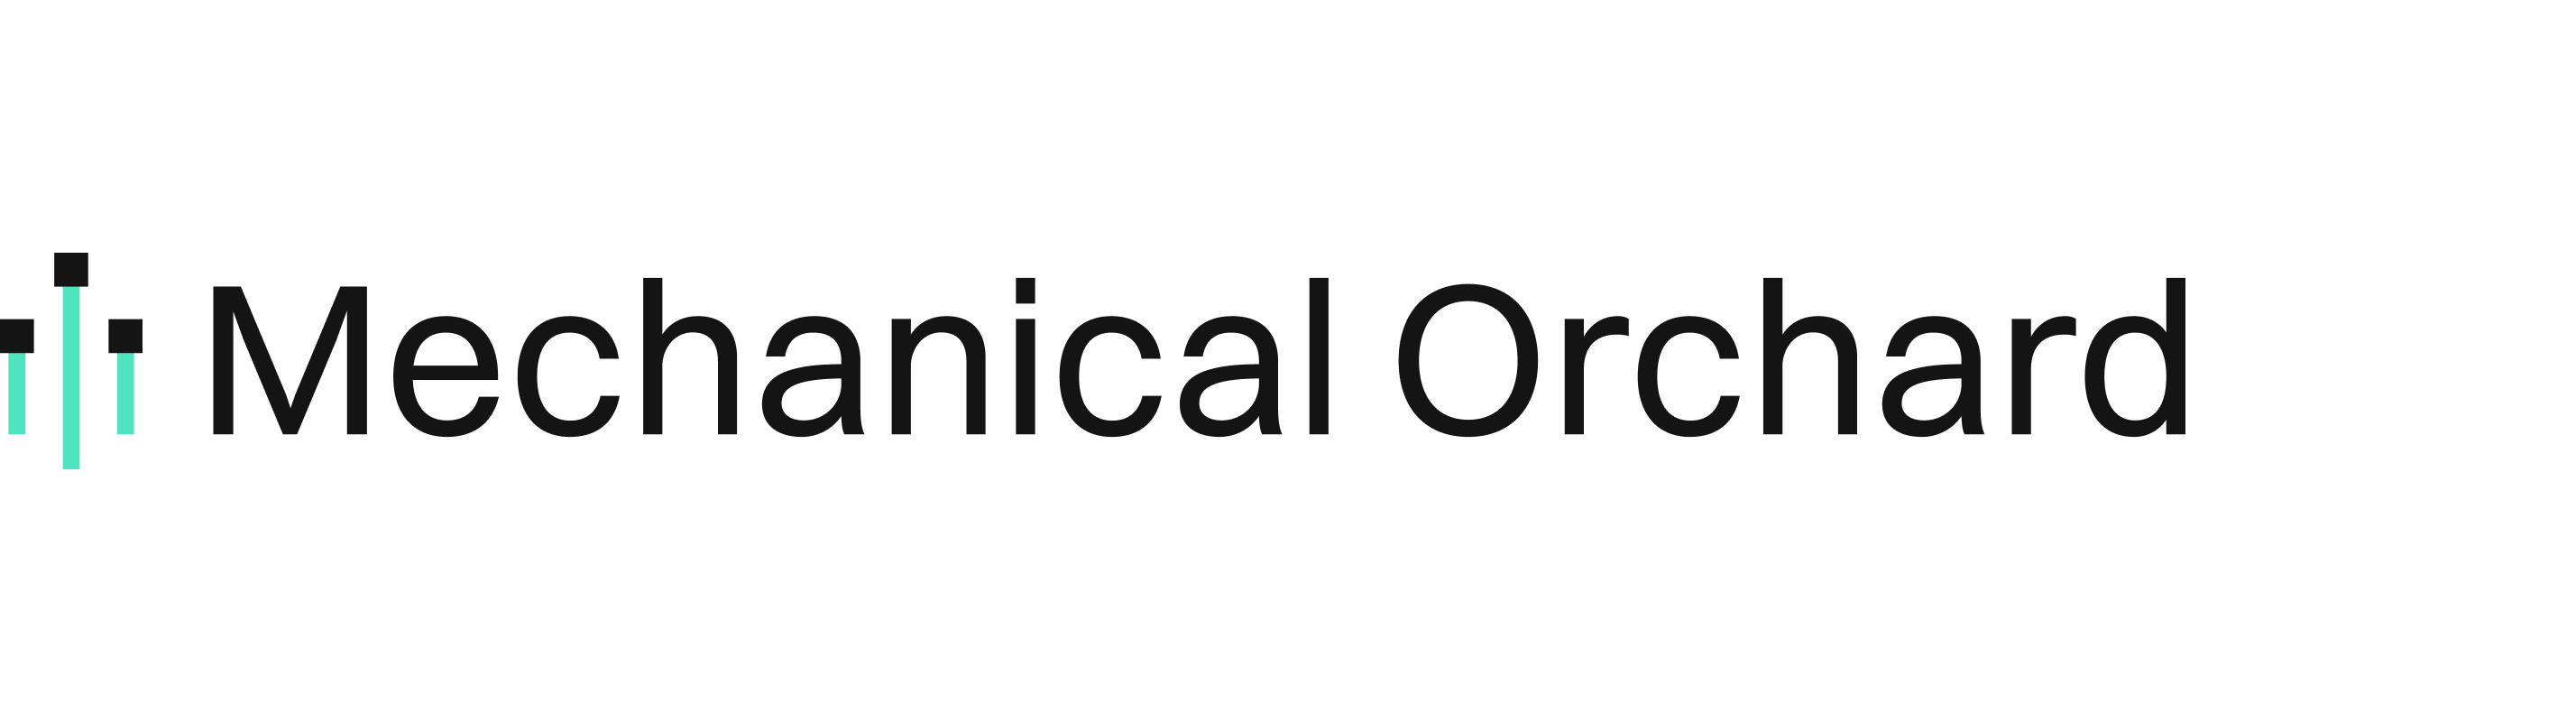 Mechanical Orchard